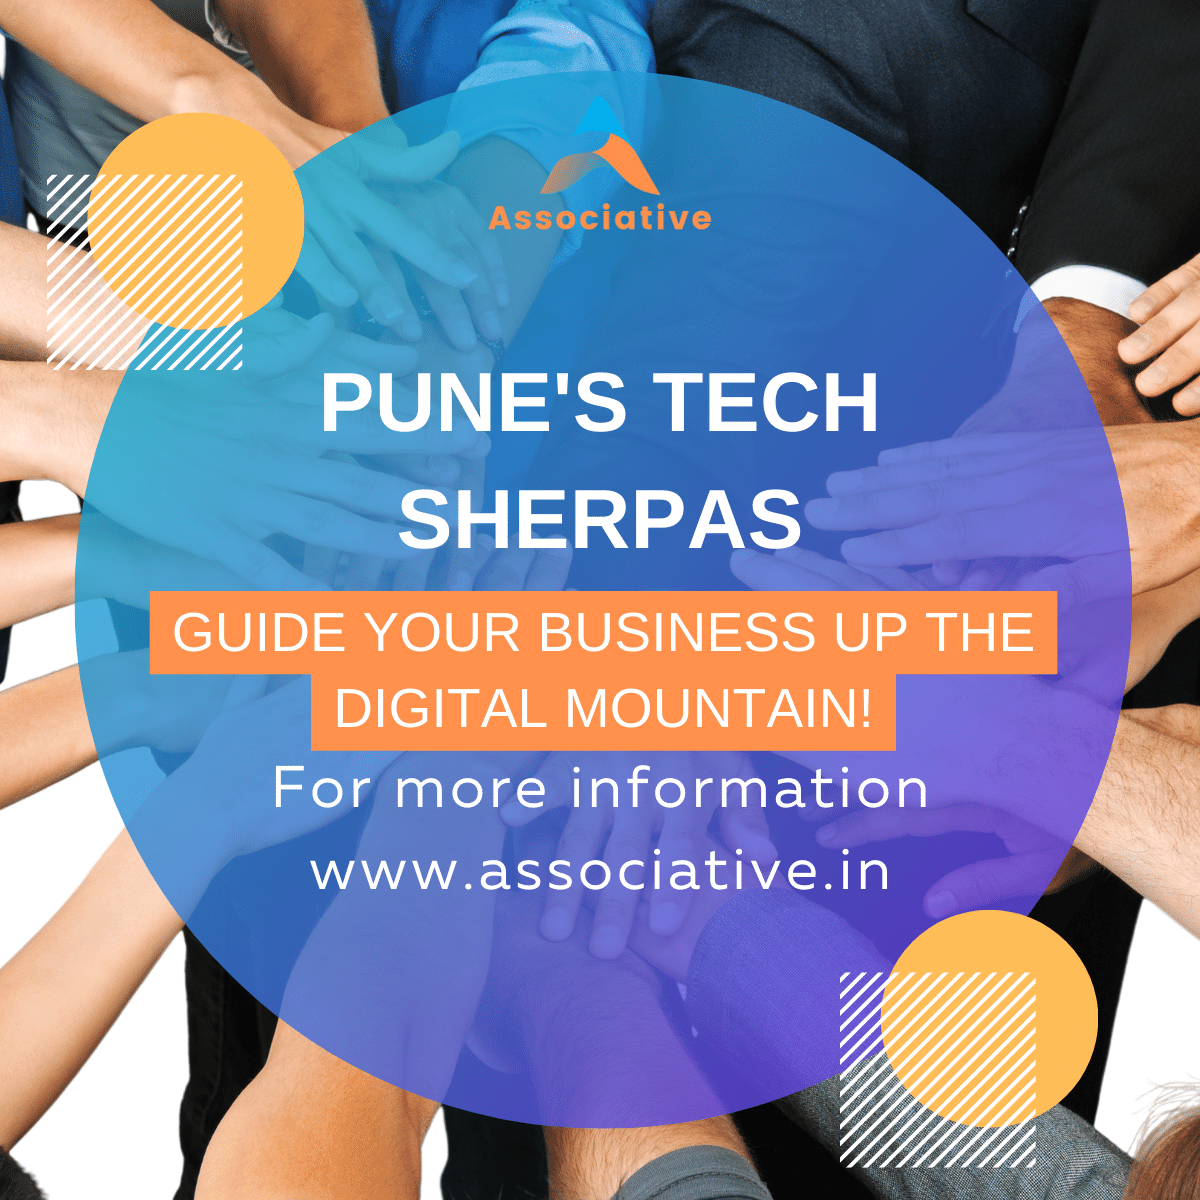 Pune's Tech Sherpas: Guide Your Business Up the Digital Mountain!